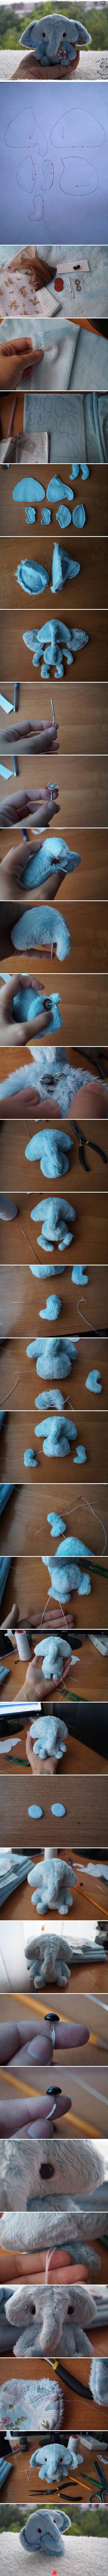 DIY Stuffed Animal - ELEPHANT - easy handmade sewing craft idea. Possible carnival prize to make over the winter?